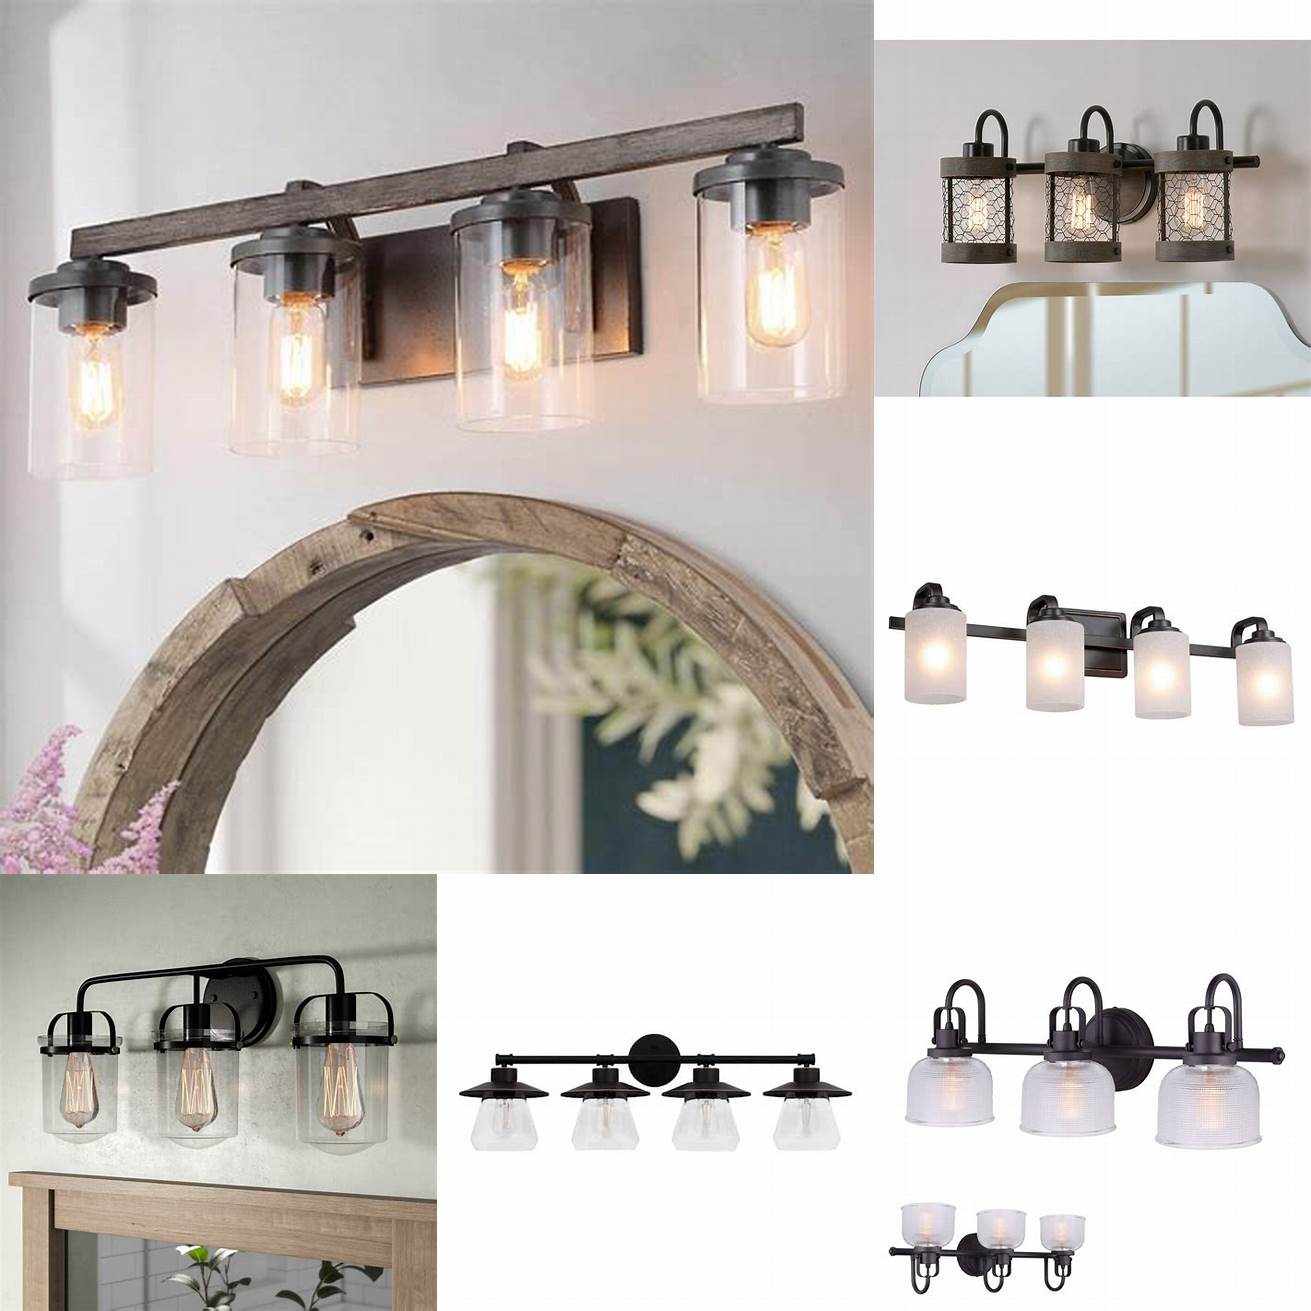 This modern farmhouse oil rubbed bronze vanity light features a shiplap-style backplate and clear glass shades